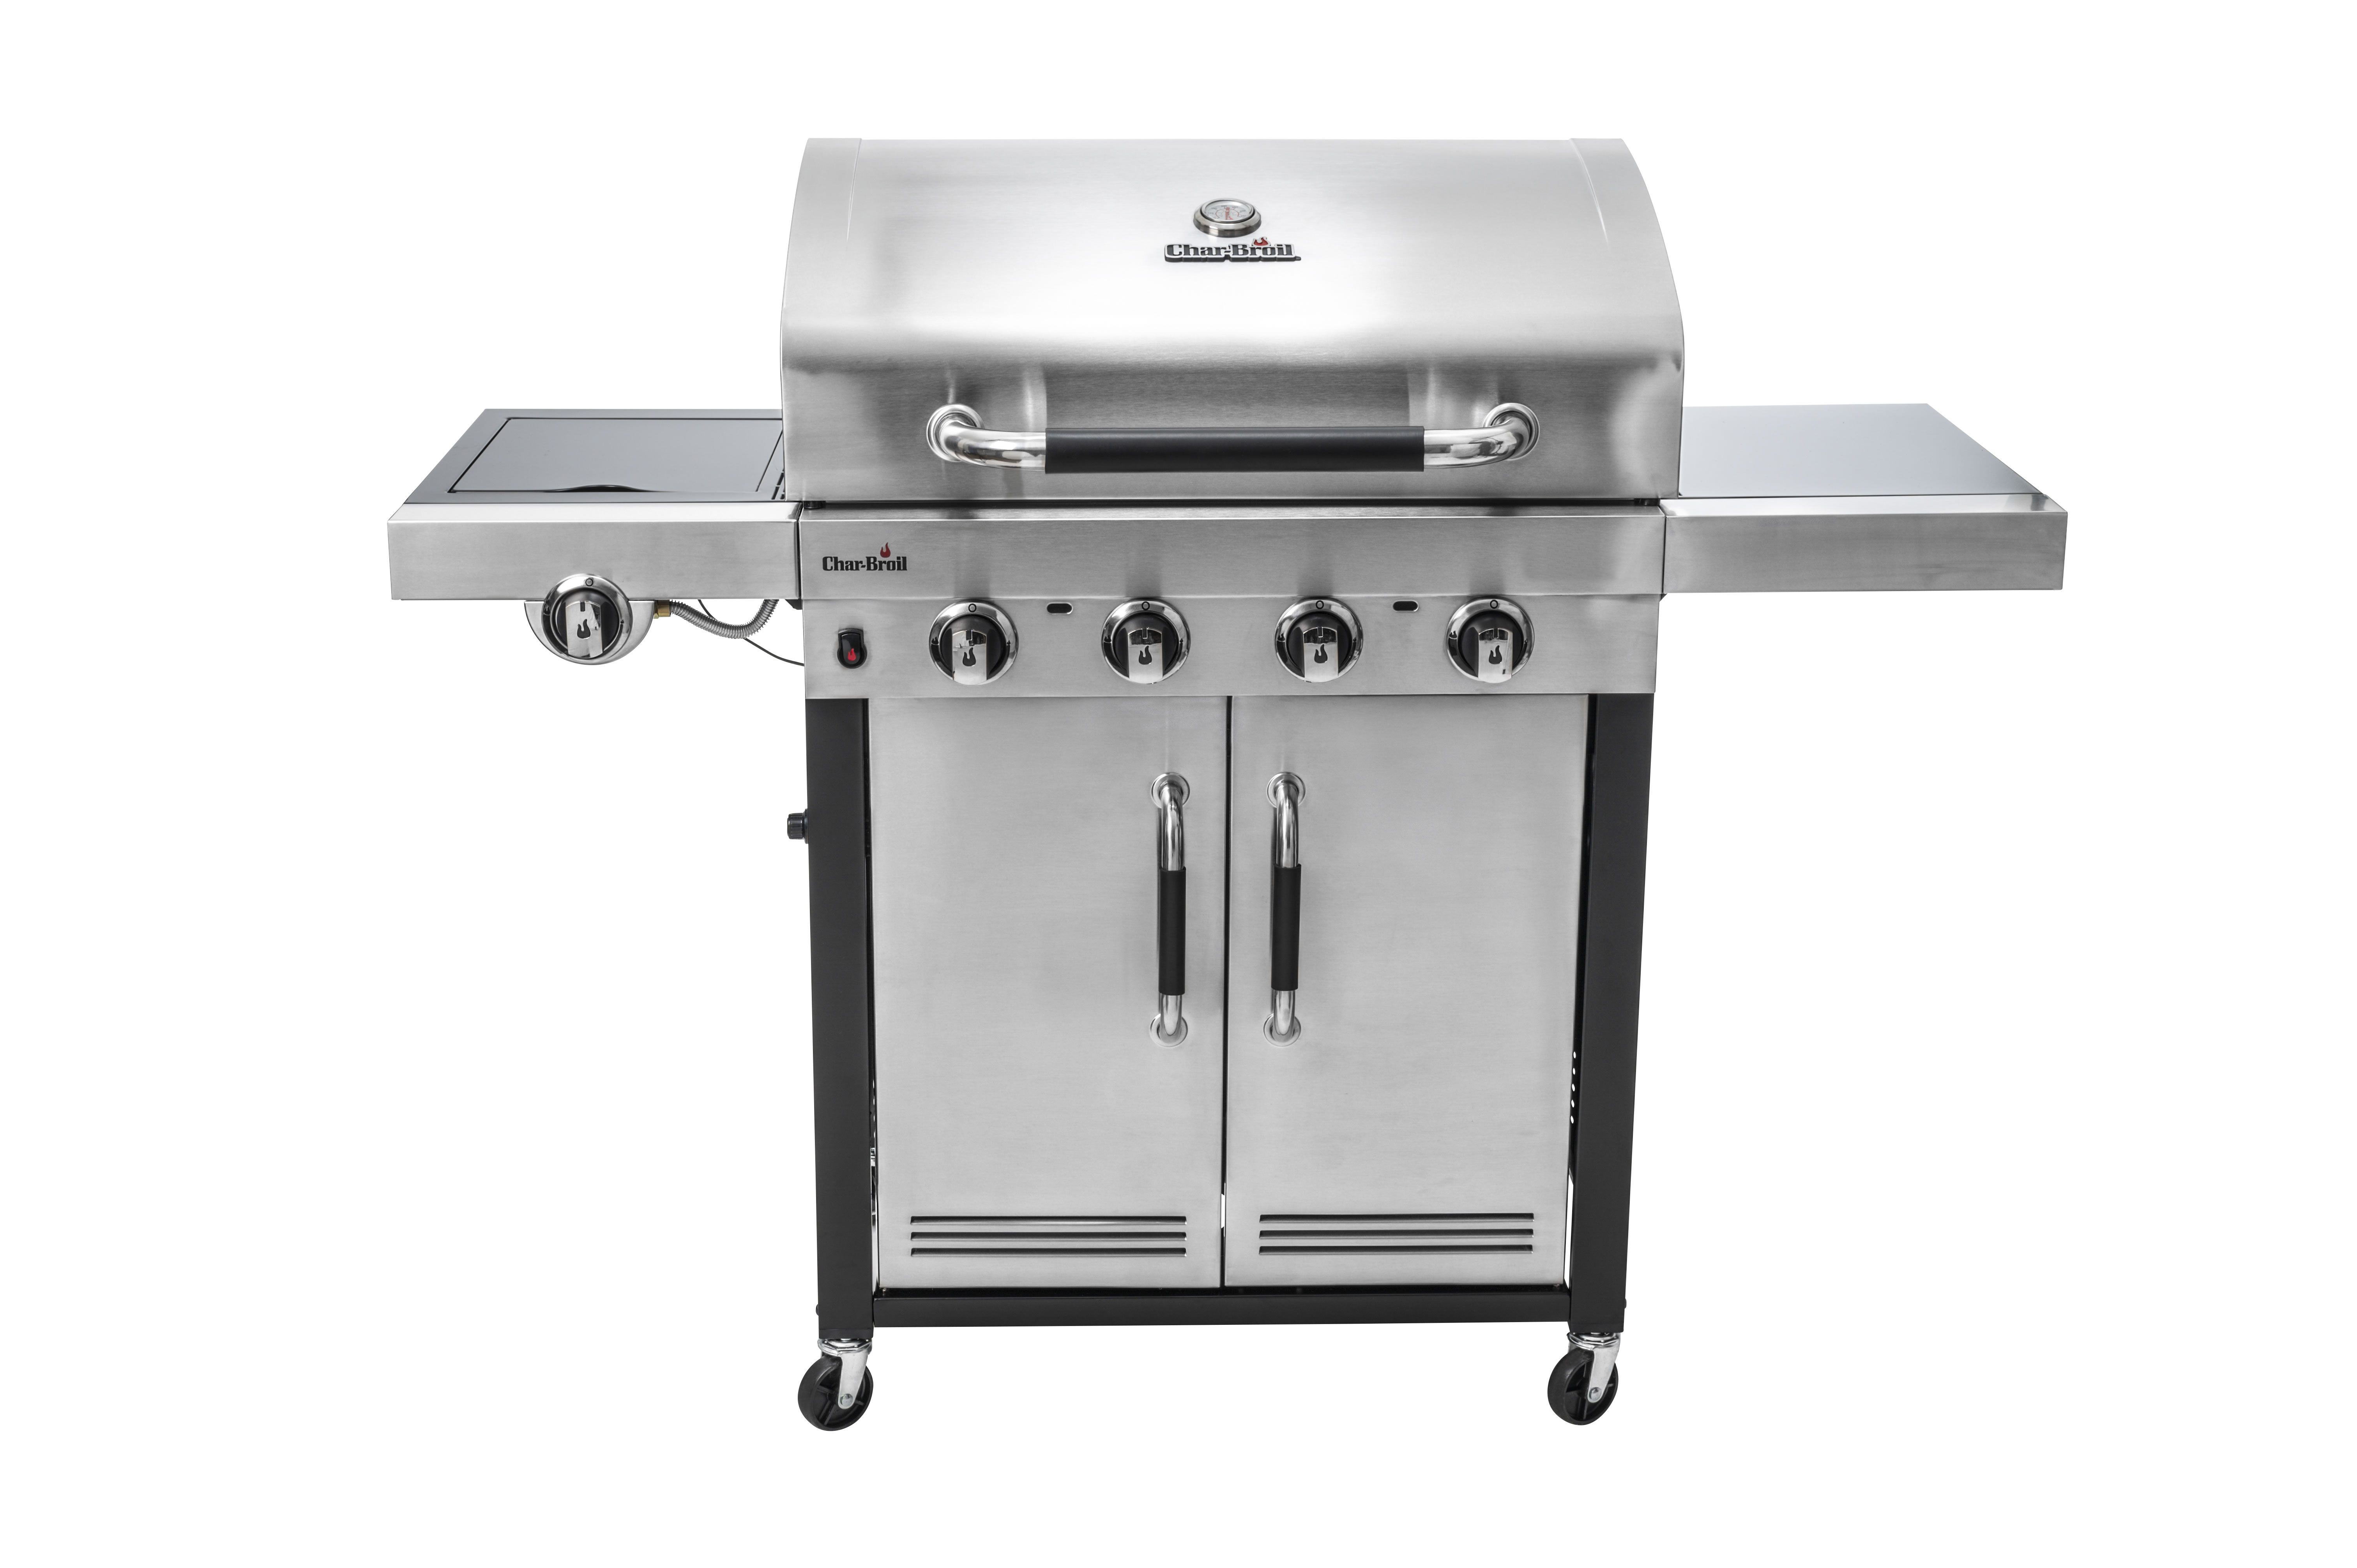 Char-Broil Advantage Series 445S 4 Burner Gas Barbecue Grill with TRU-Infrared technology (Stainless Steel)